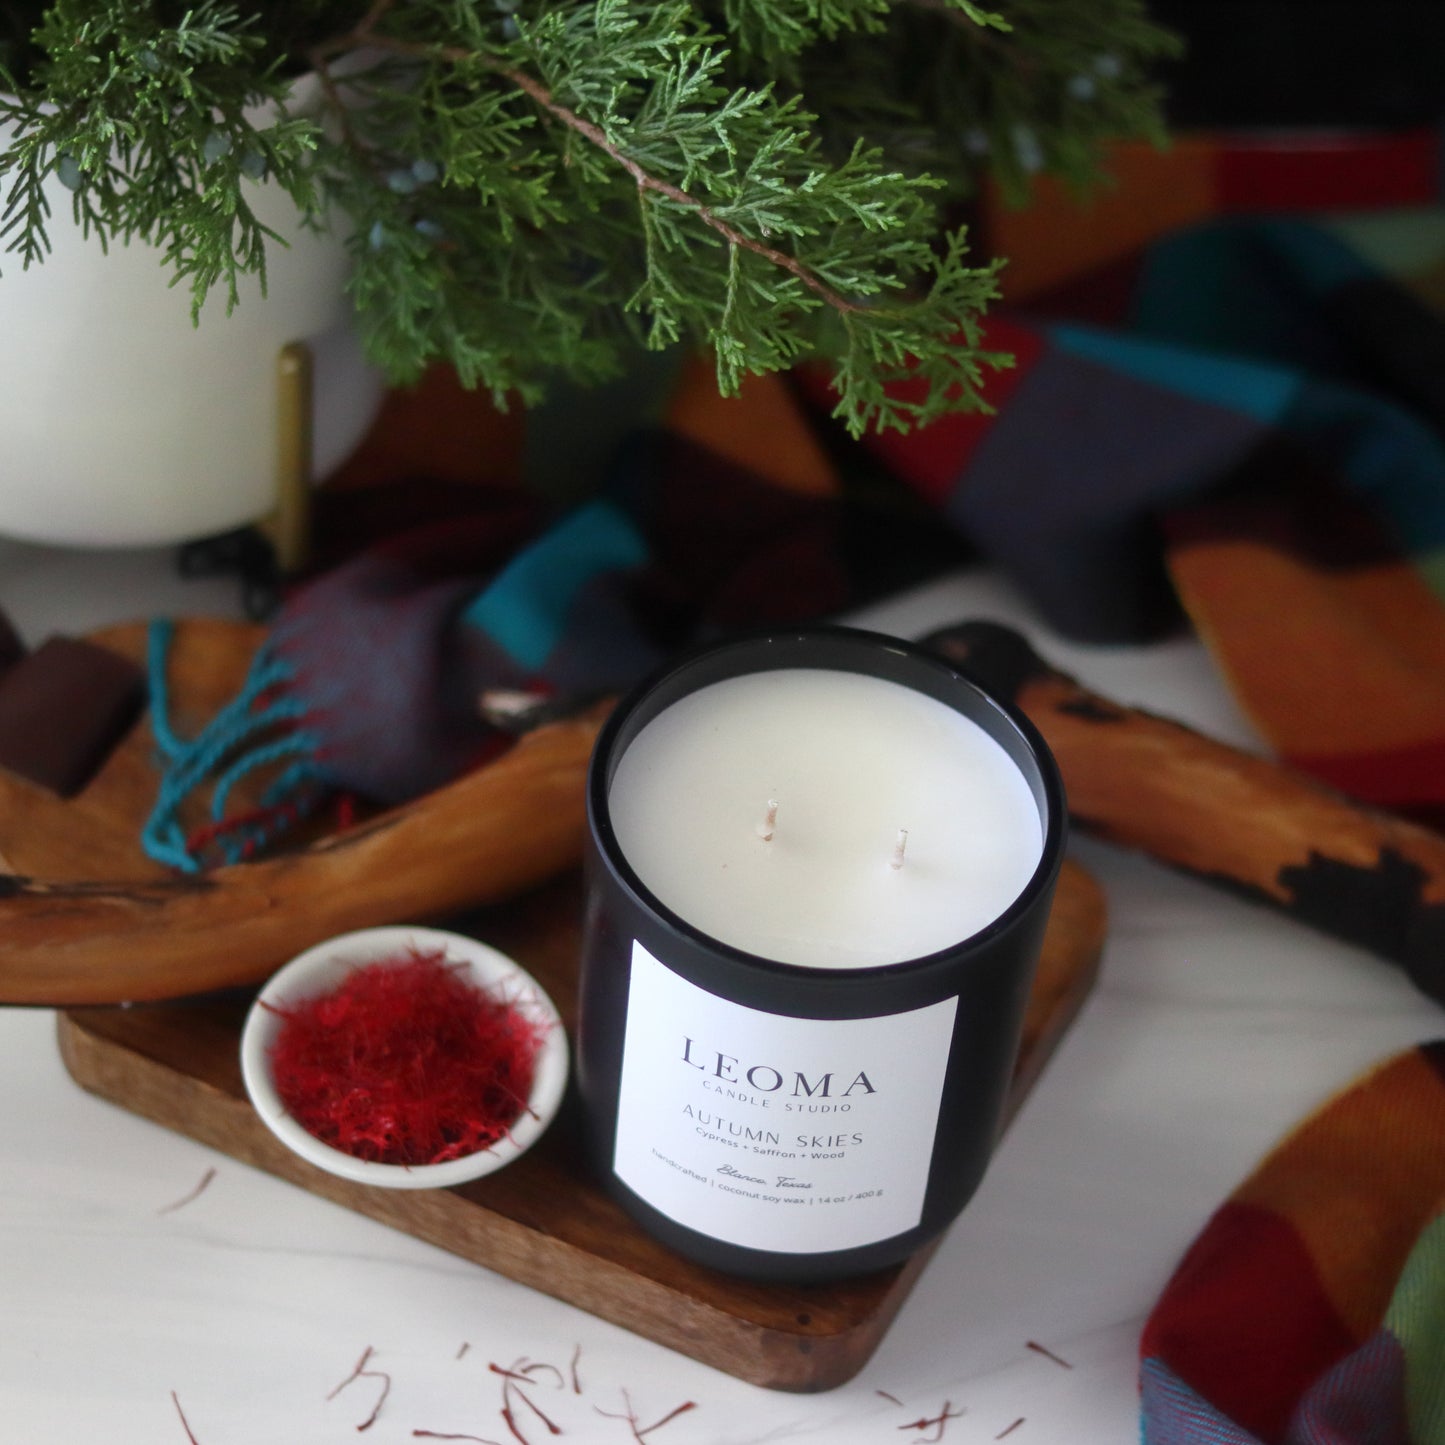 Scented natural soy candle. non toxic. Autumn Skies fall scent. Black vessel. top.